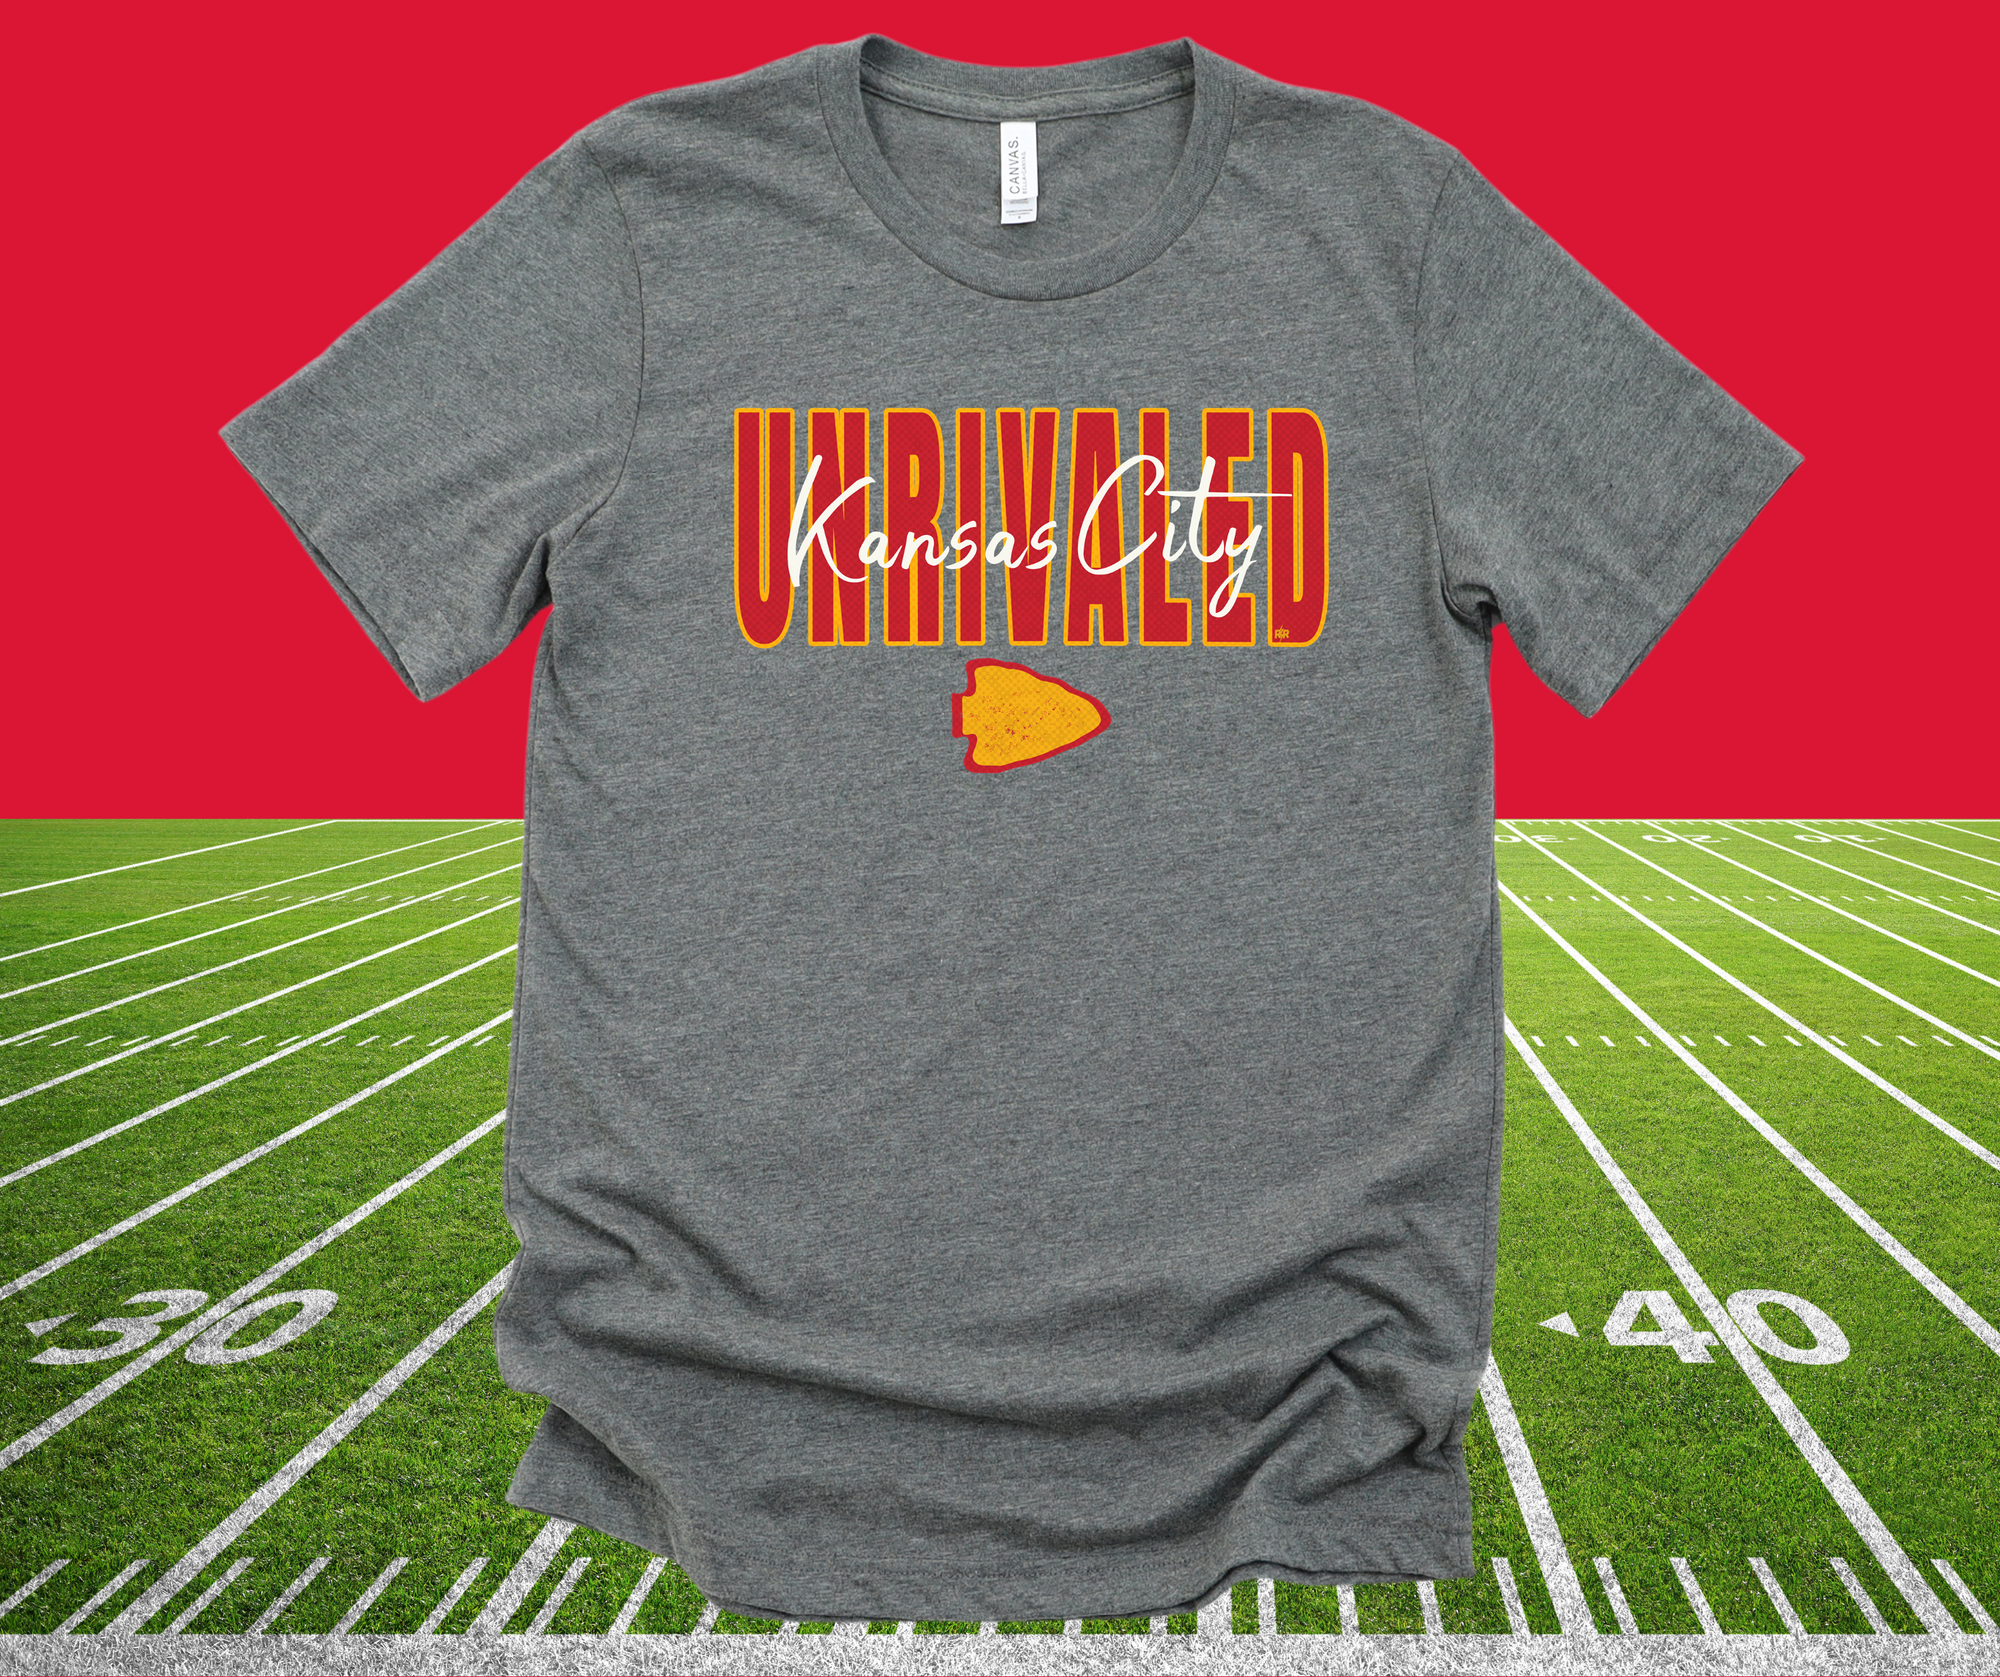 Unrivaled Kansas City Grey Graphic Tshirt - The Red Rival